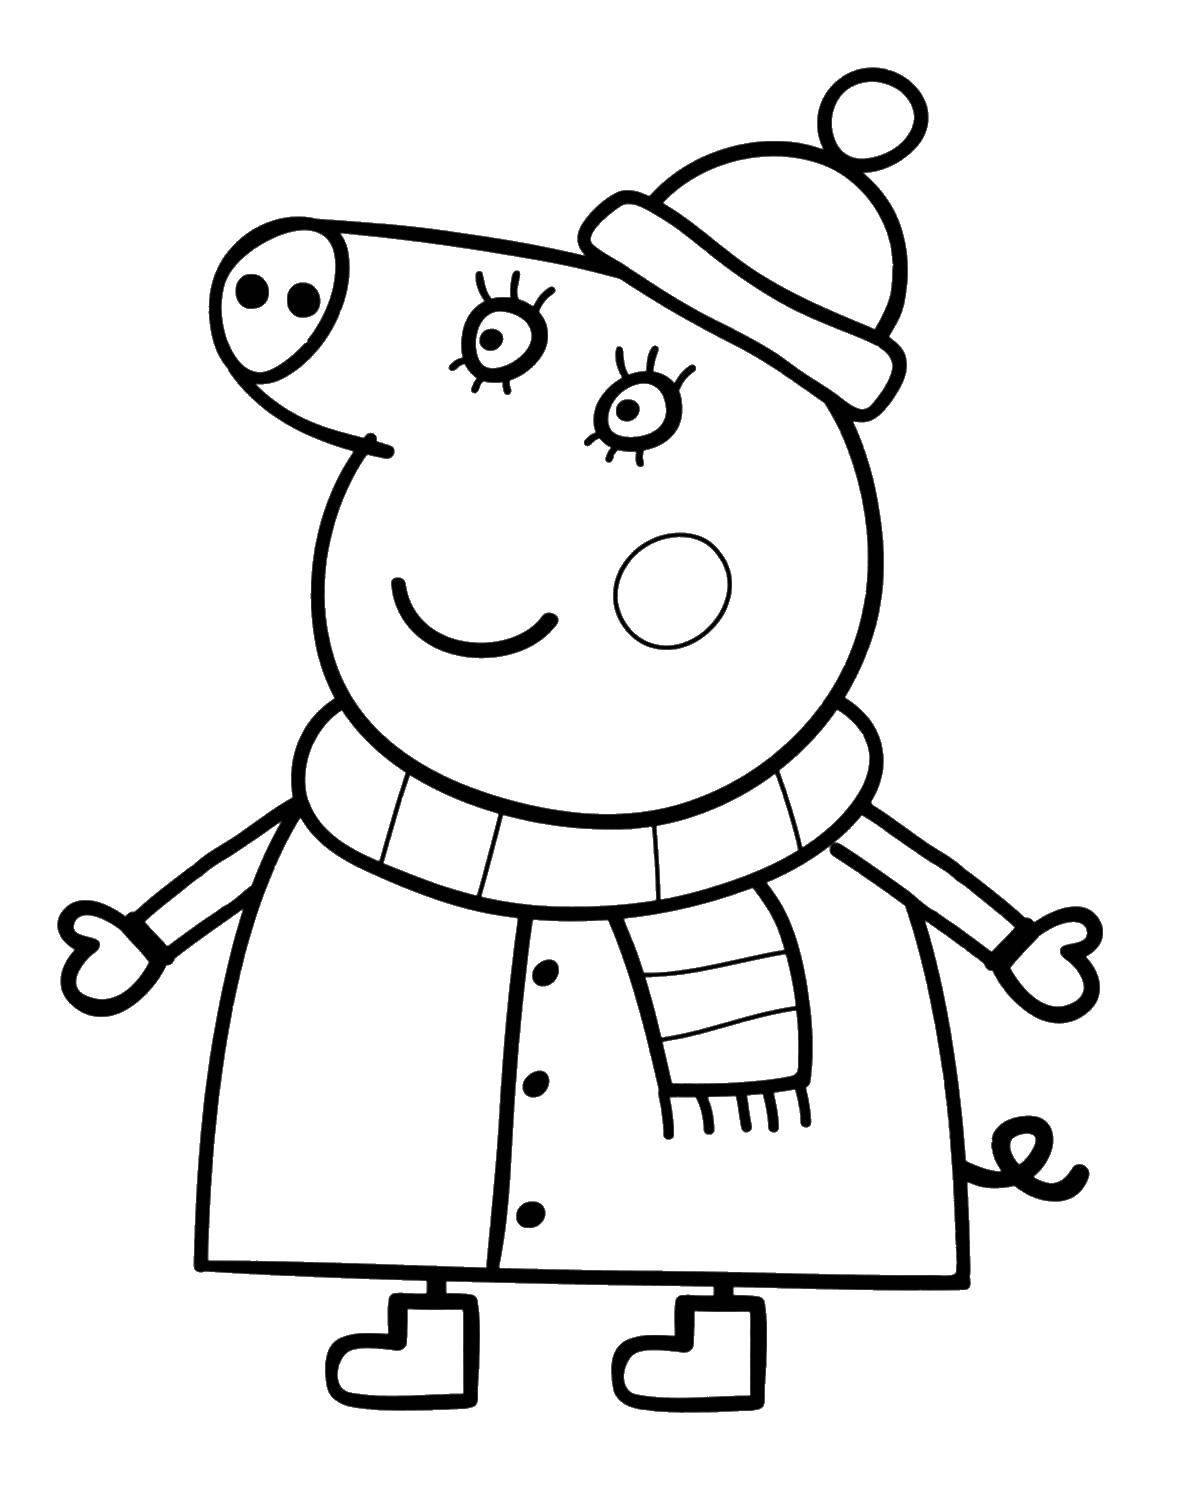 Coloring Mama pig in winter. Category Peppa Pig. Tags:  Peppa Pig.